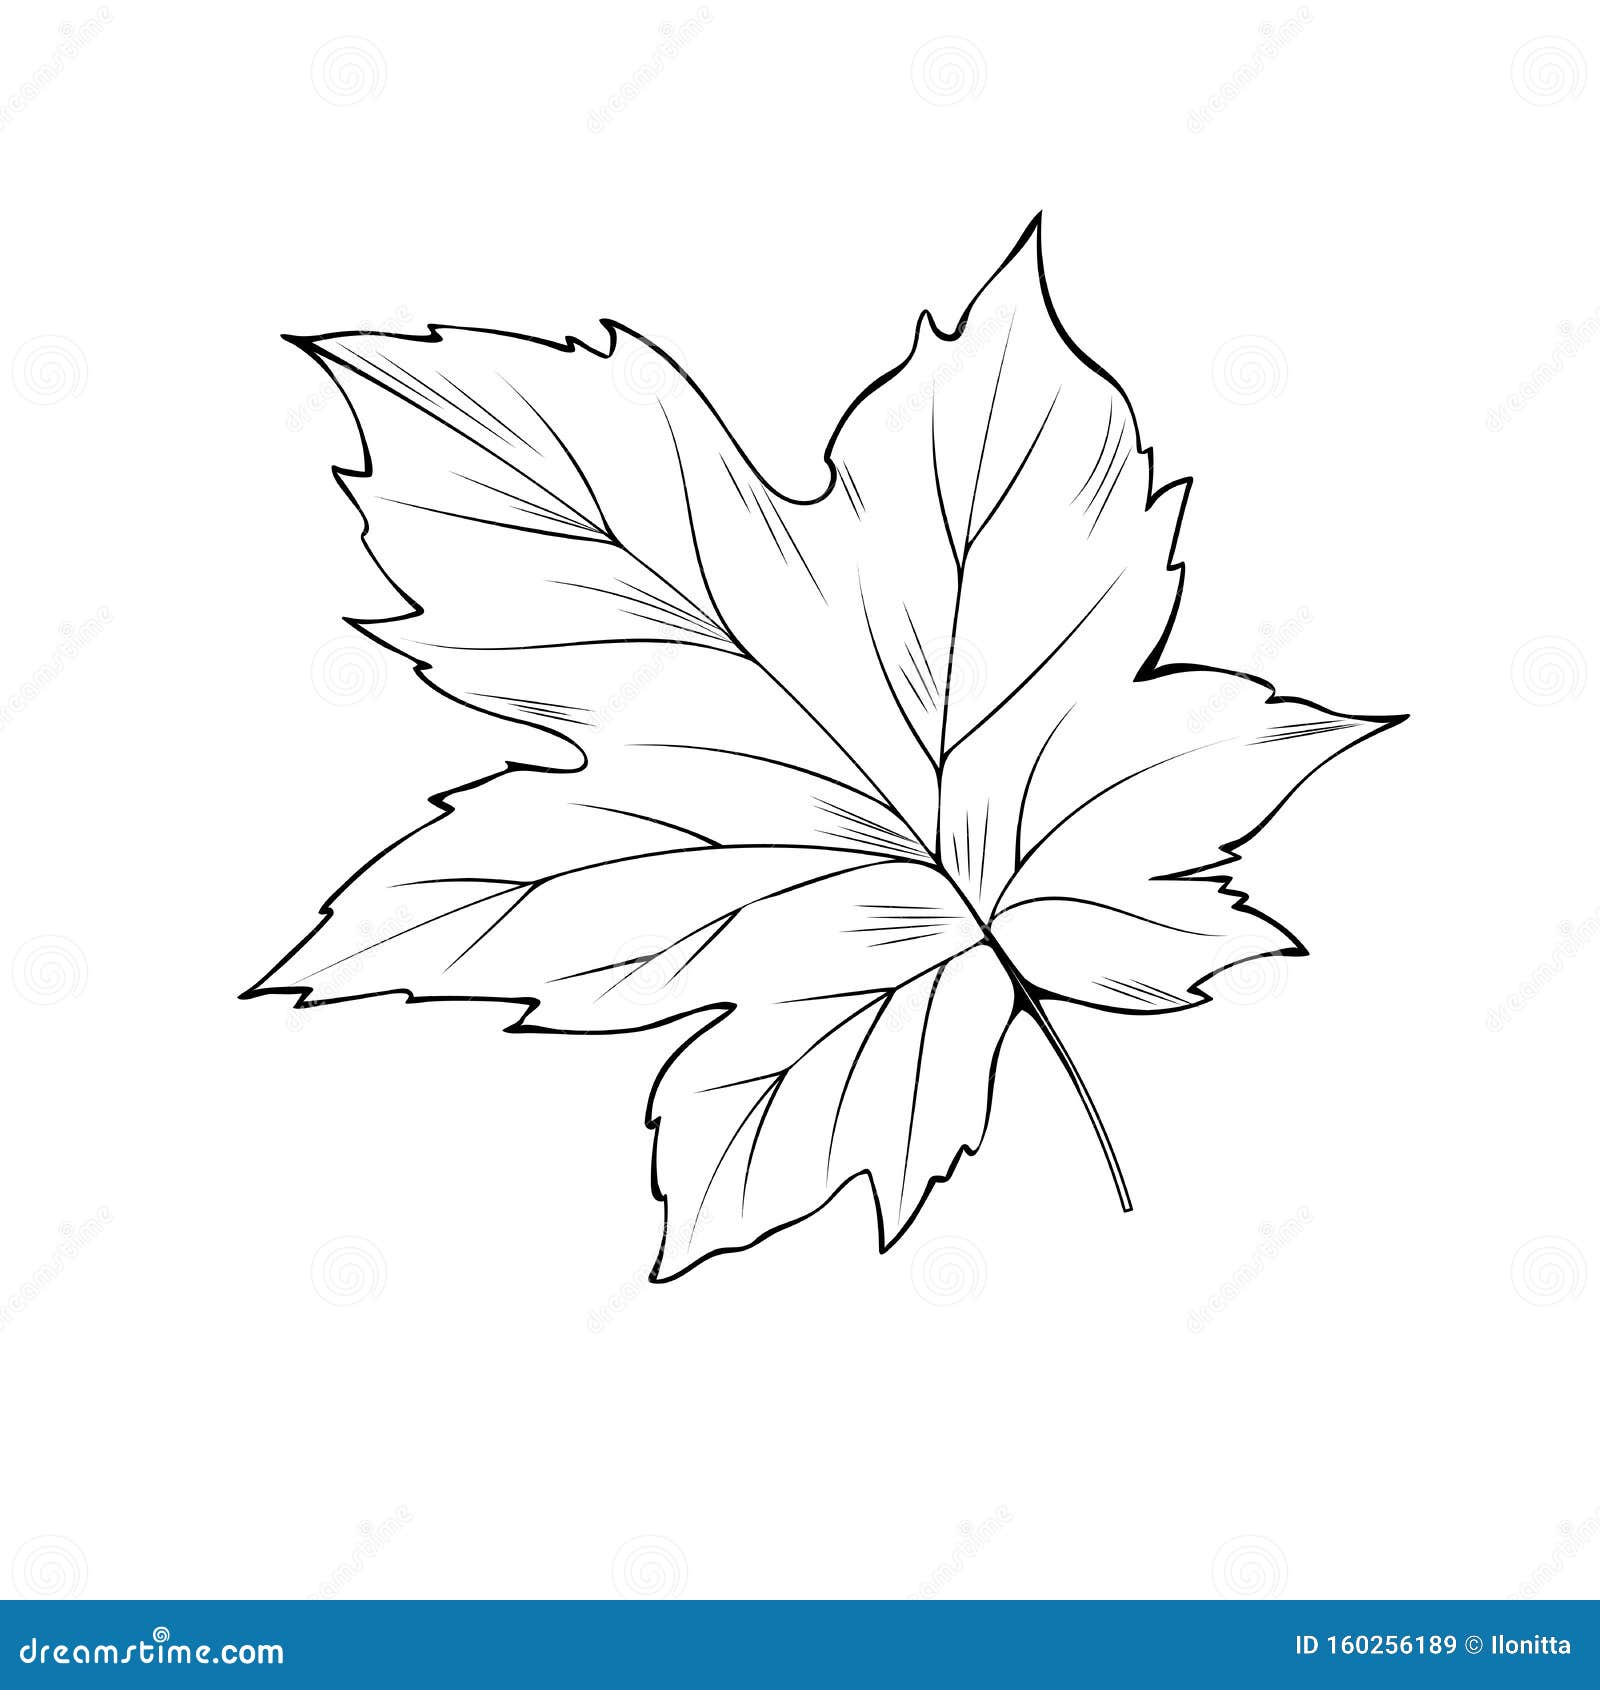 Maple tree leaf coloring book vector illustration stock vector